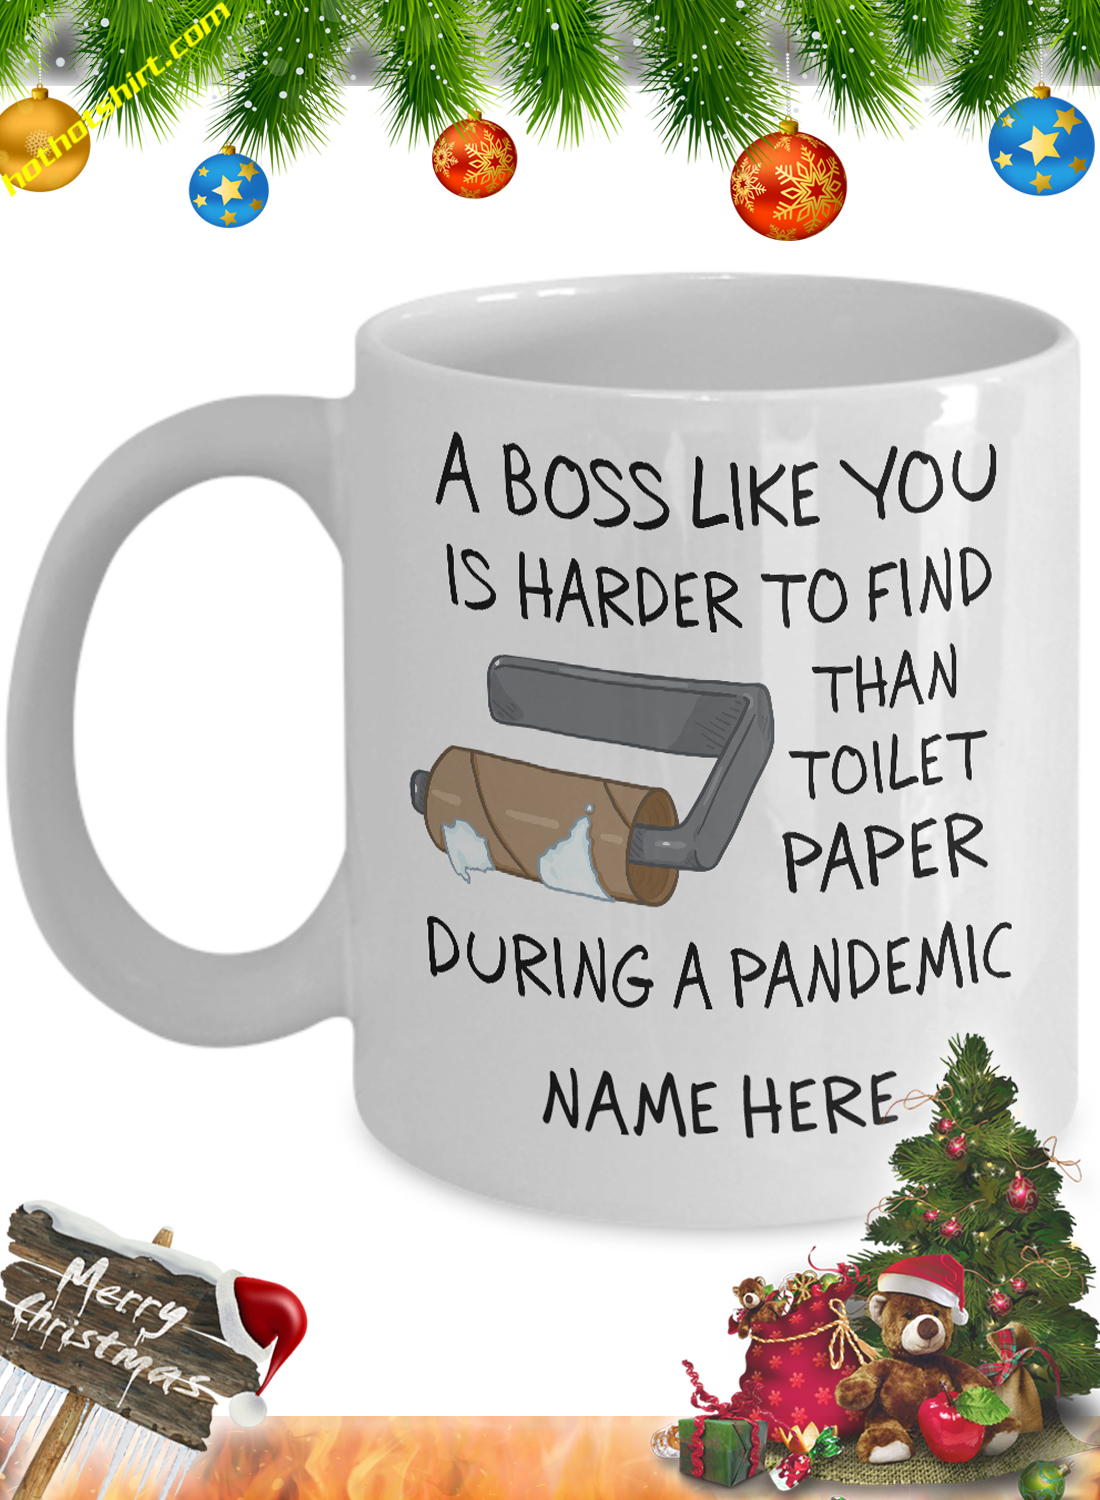 Personalized custom name A boss like you is harder to find than toilet mug